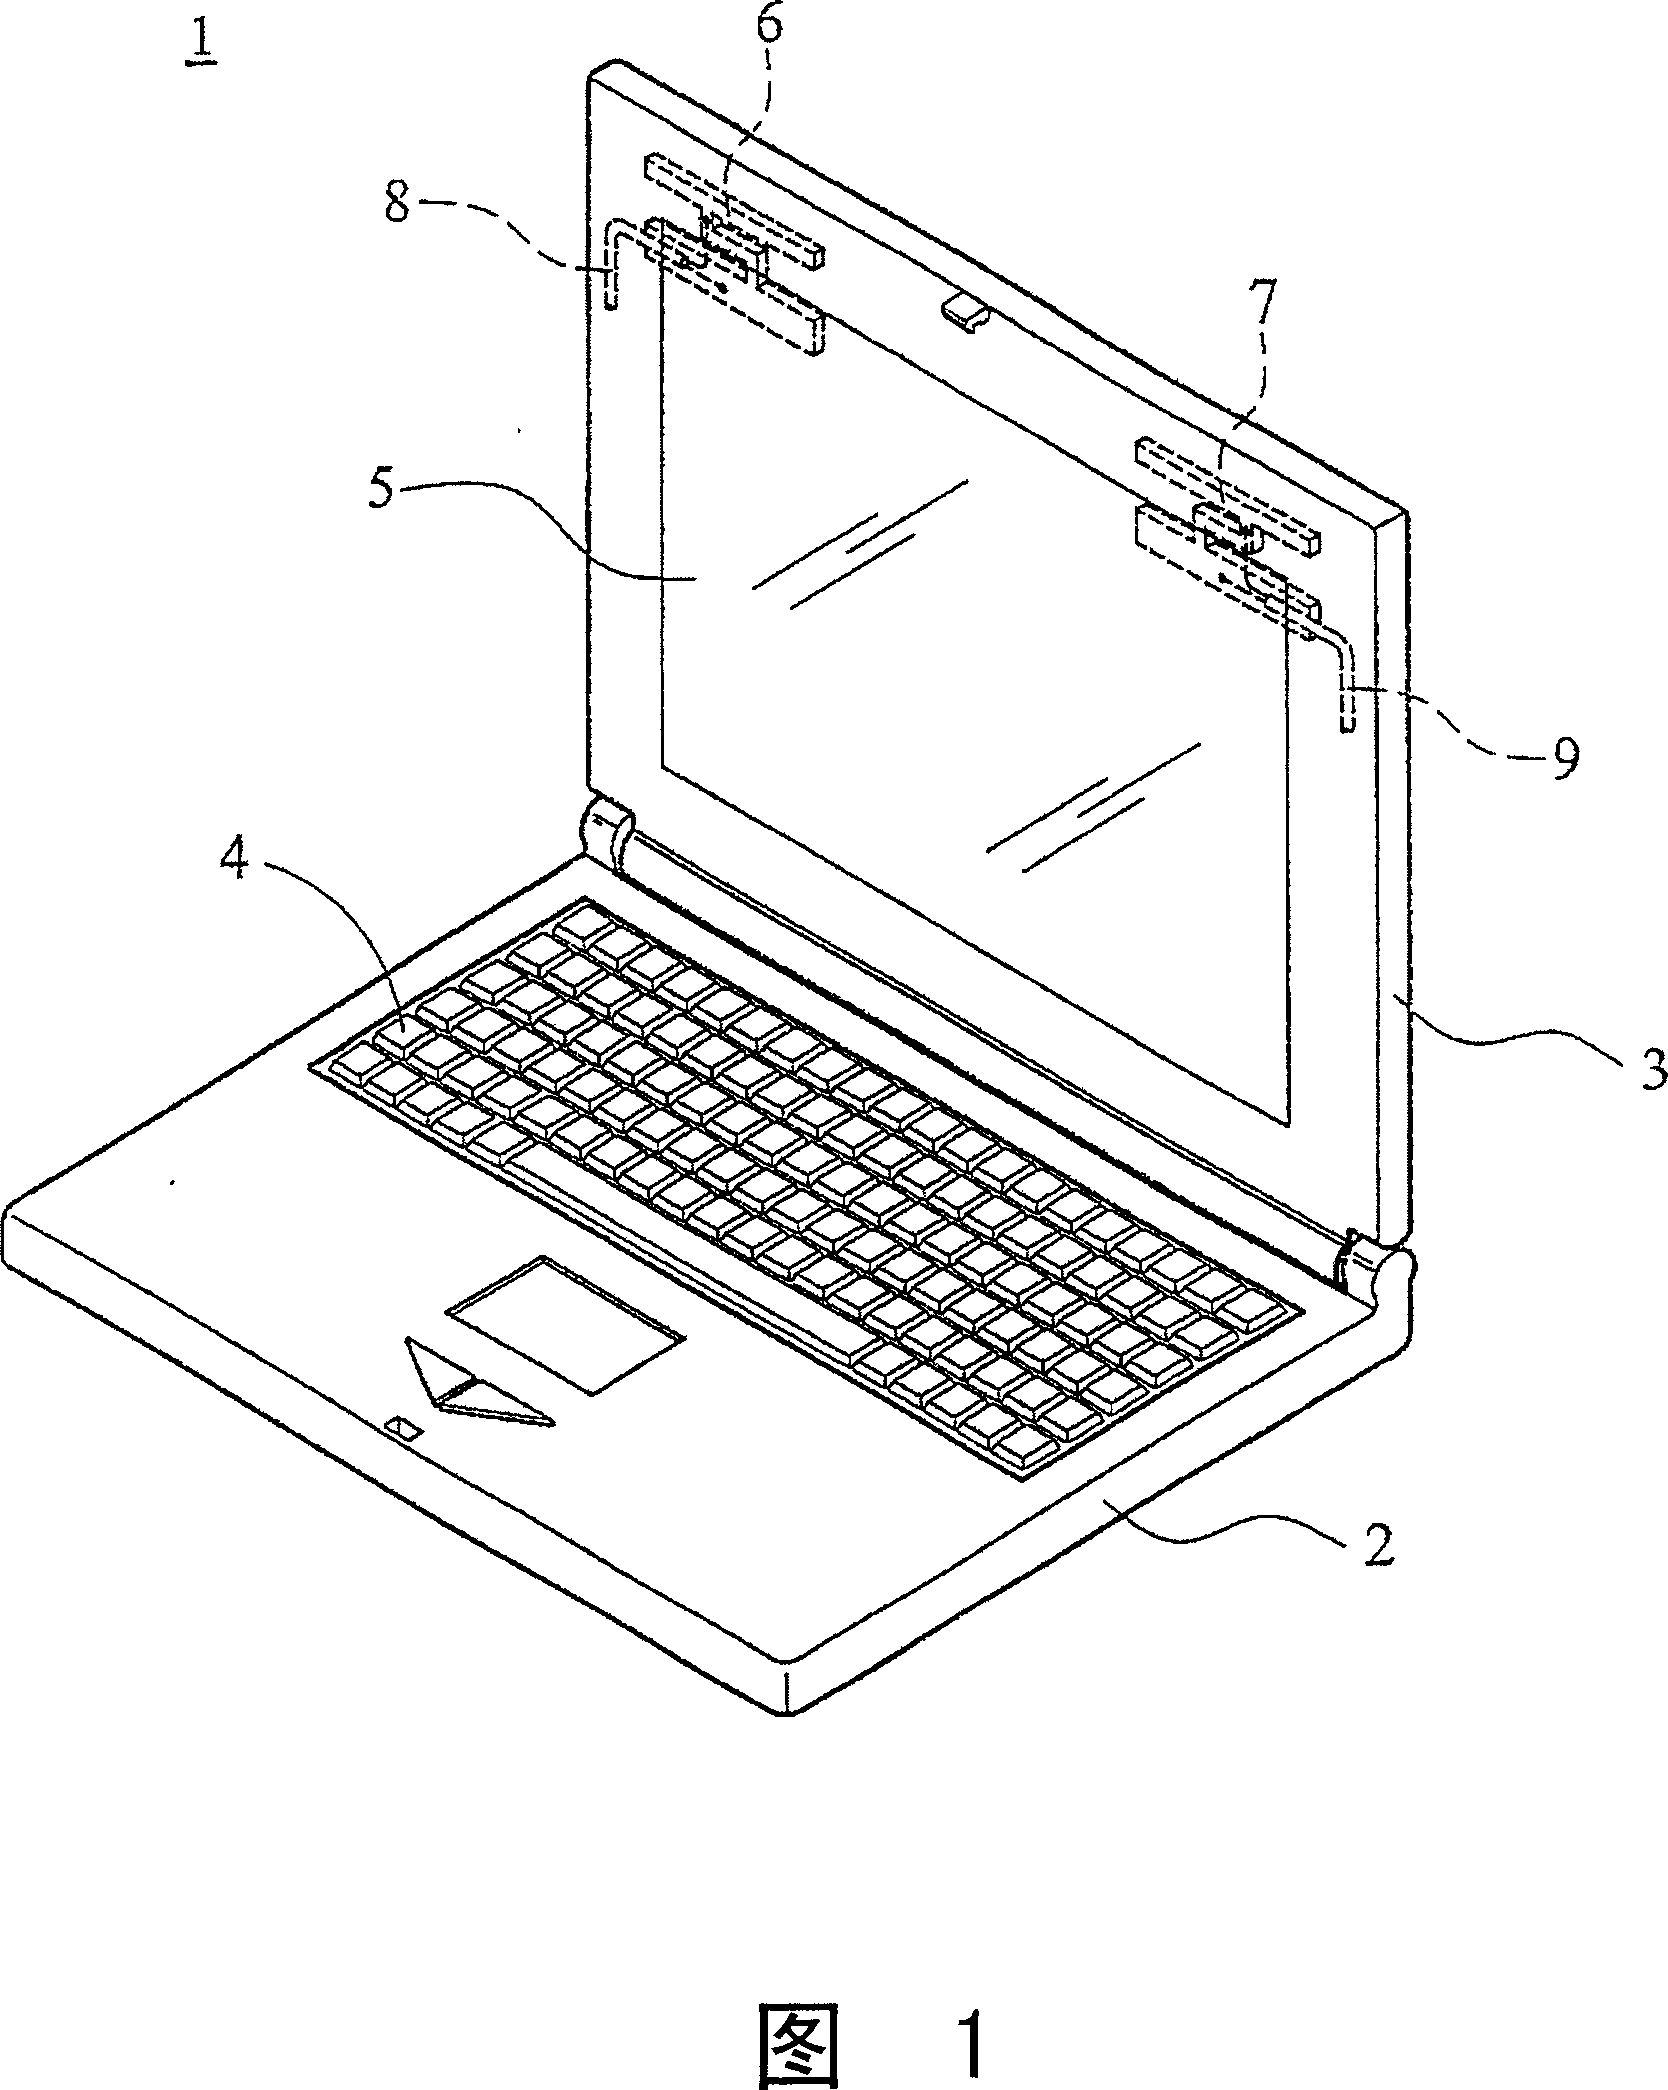 Notebook computer and its antenna structure